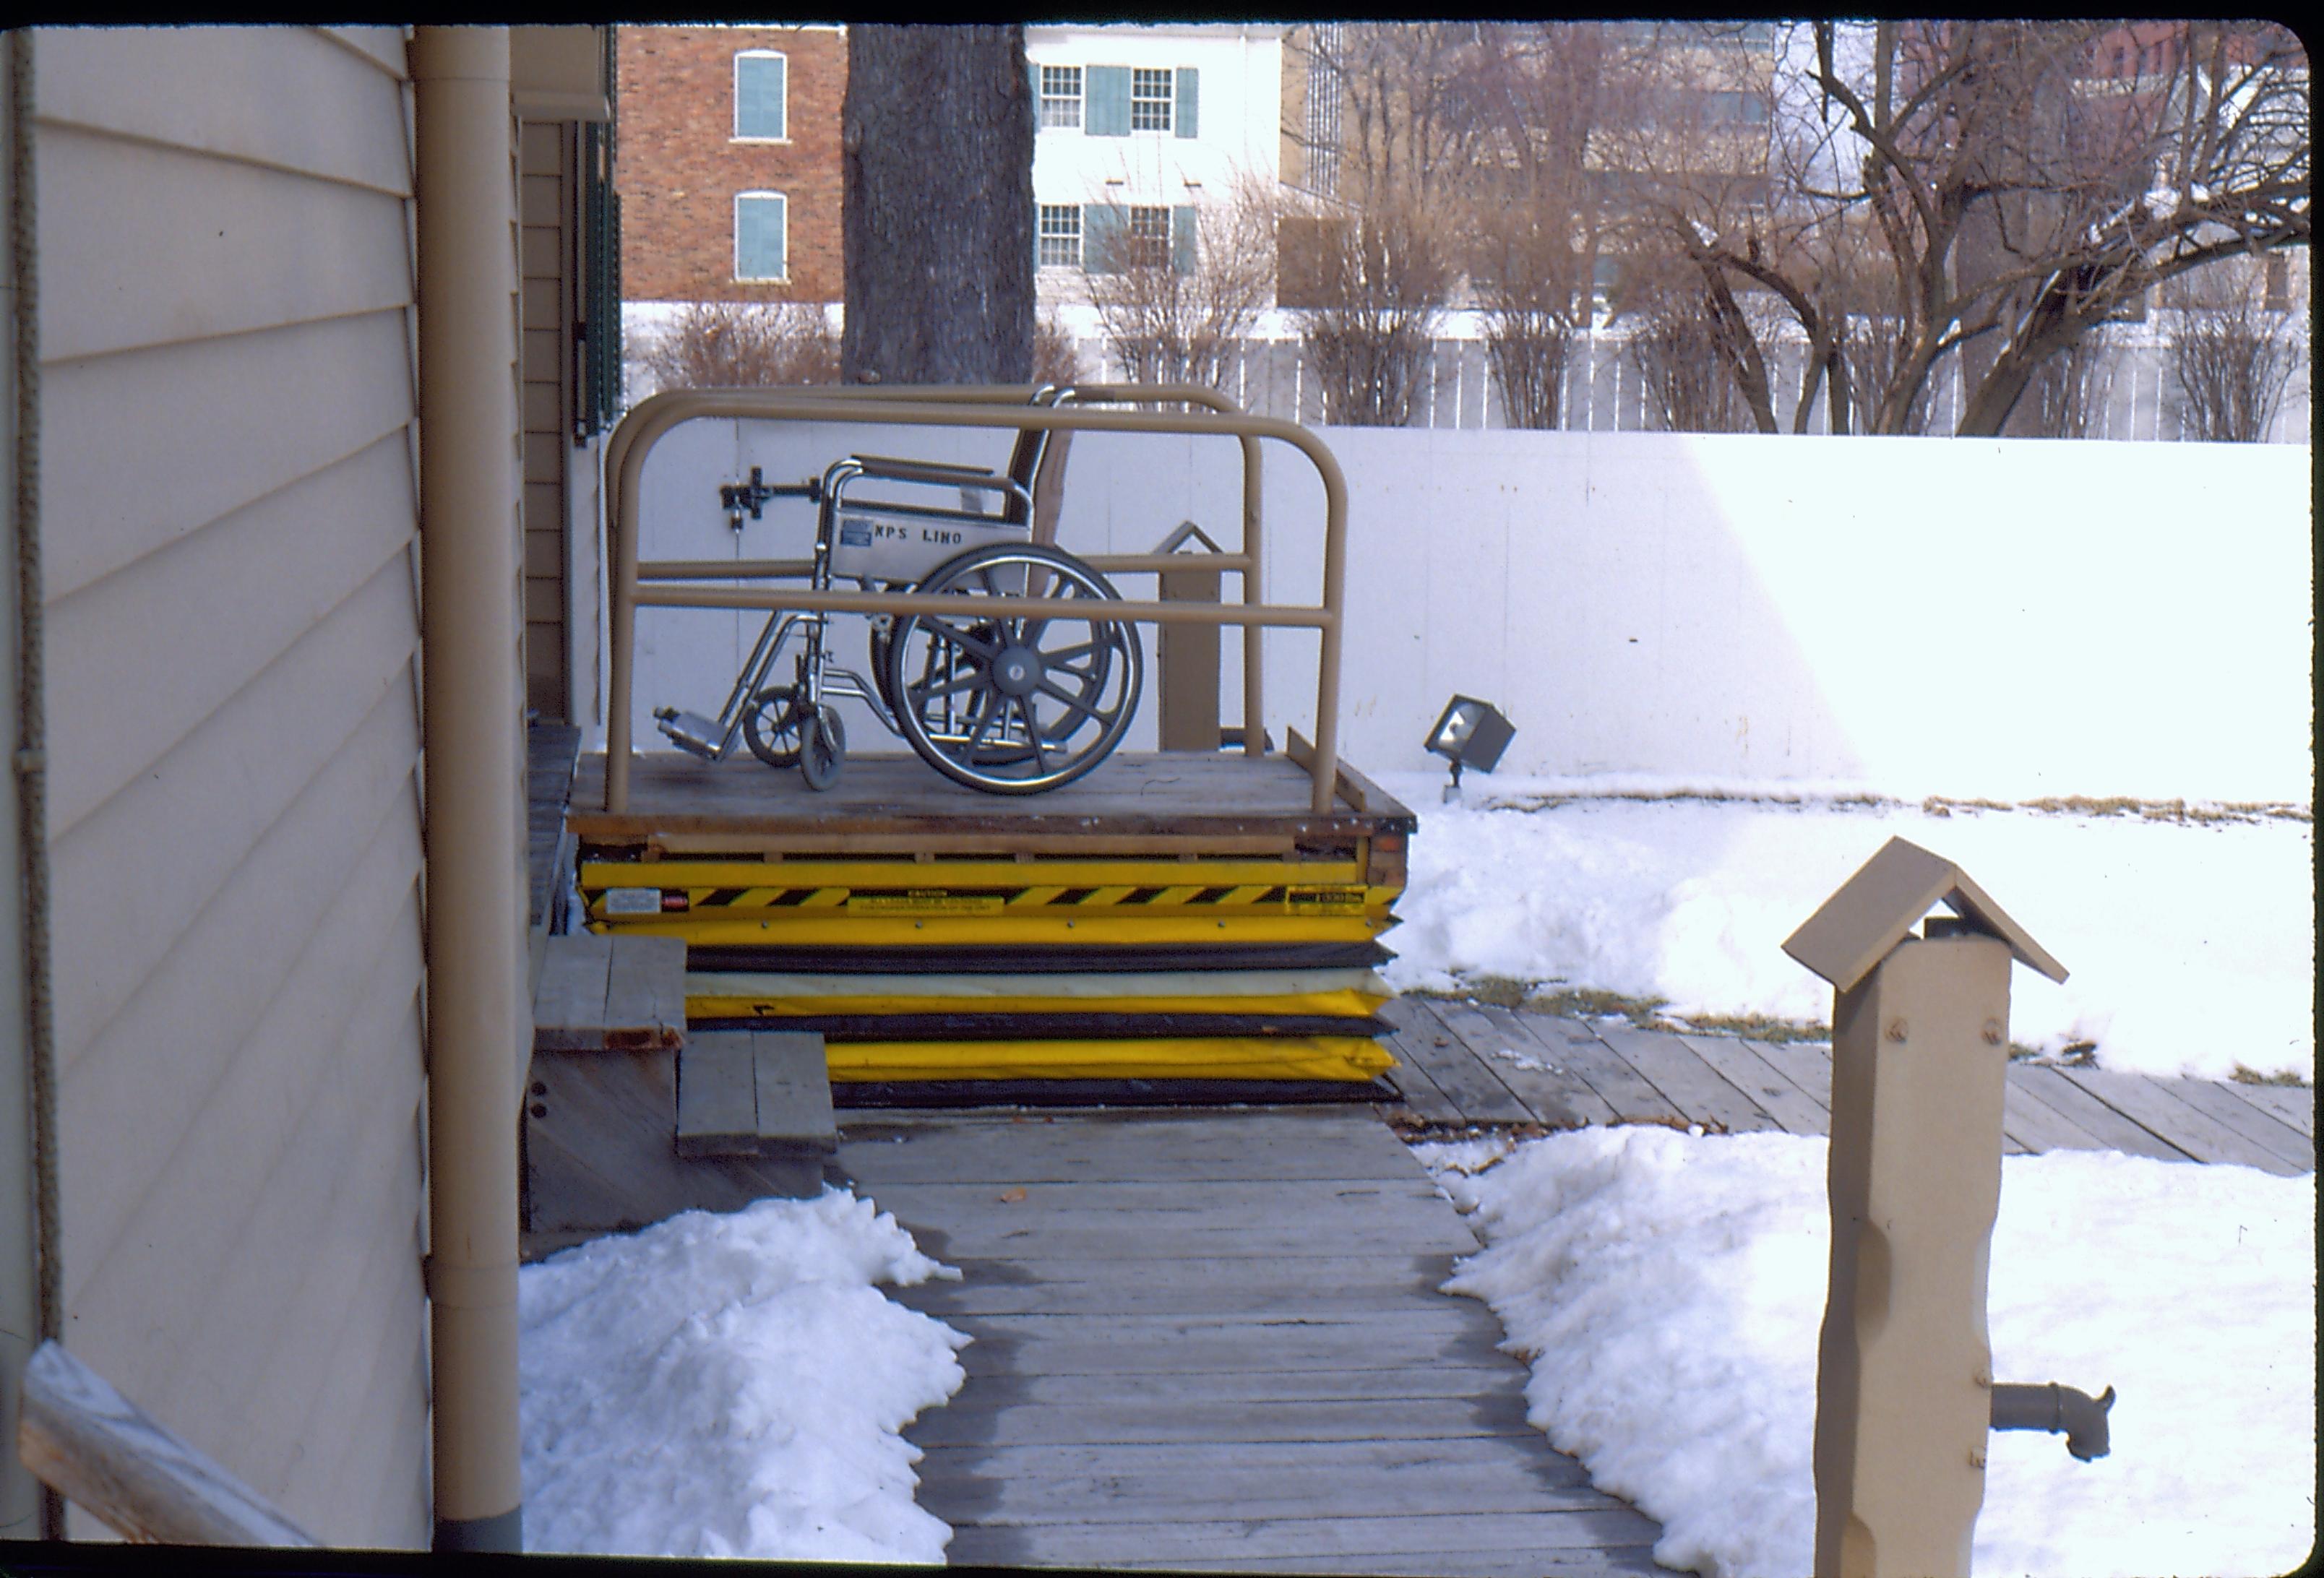 Wheelchair lift of the Lincoln Home, at full height, with empty wheelchair. Snow on the ground. Photographer facing north.